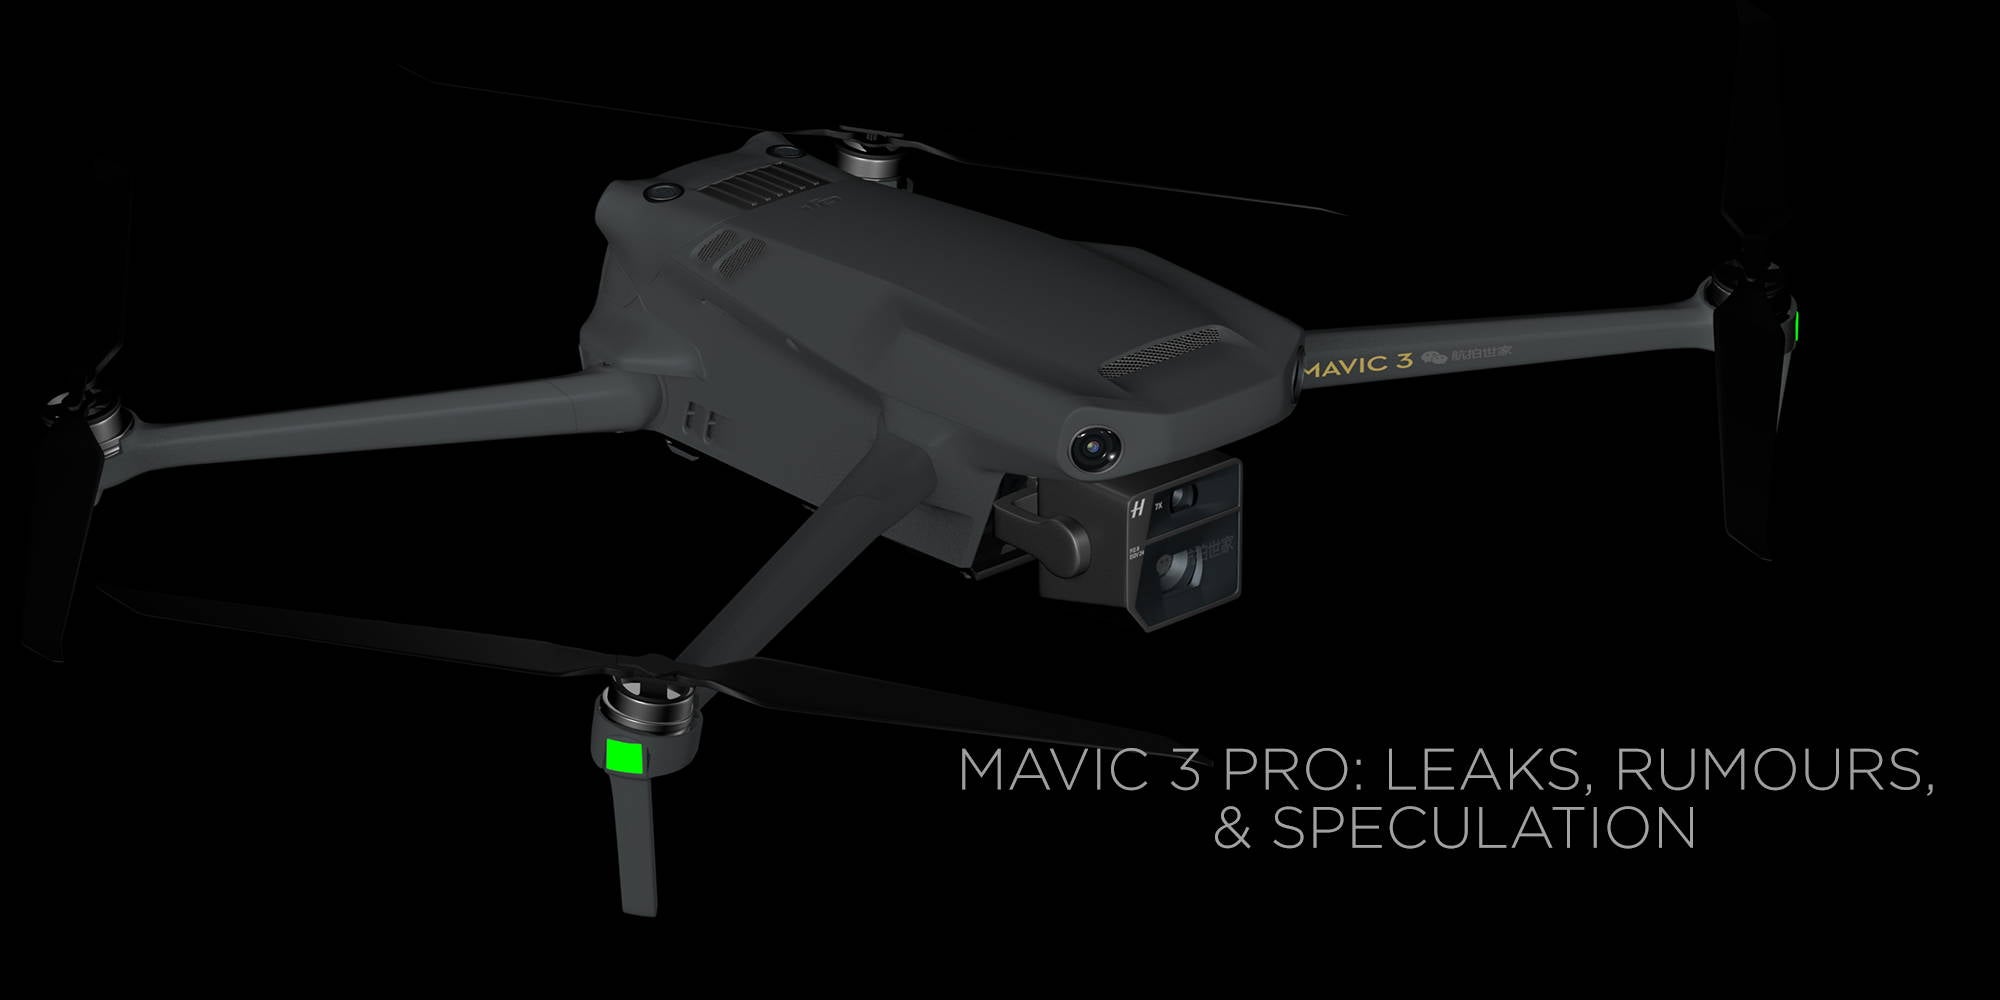 DJI Teases New Releases: Reports Speculate It Is The Mavic 3 Pro